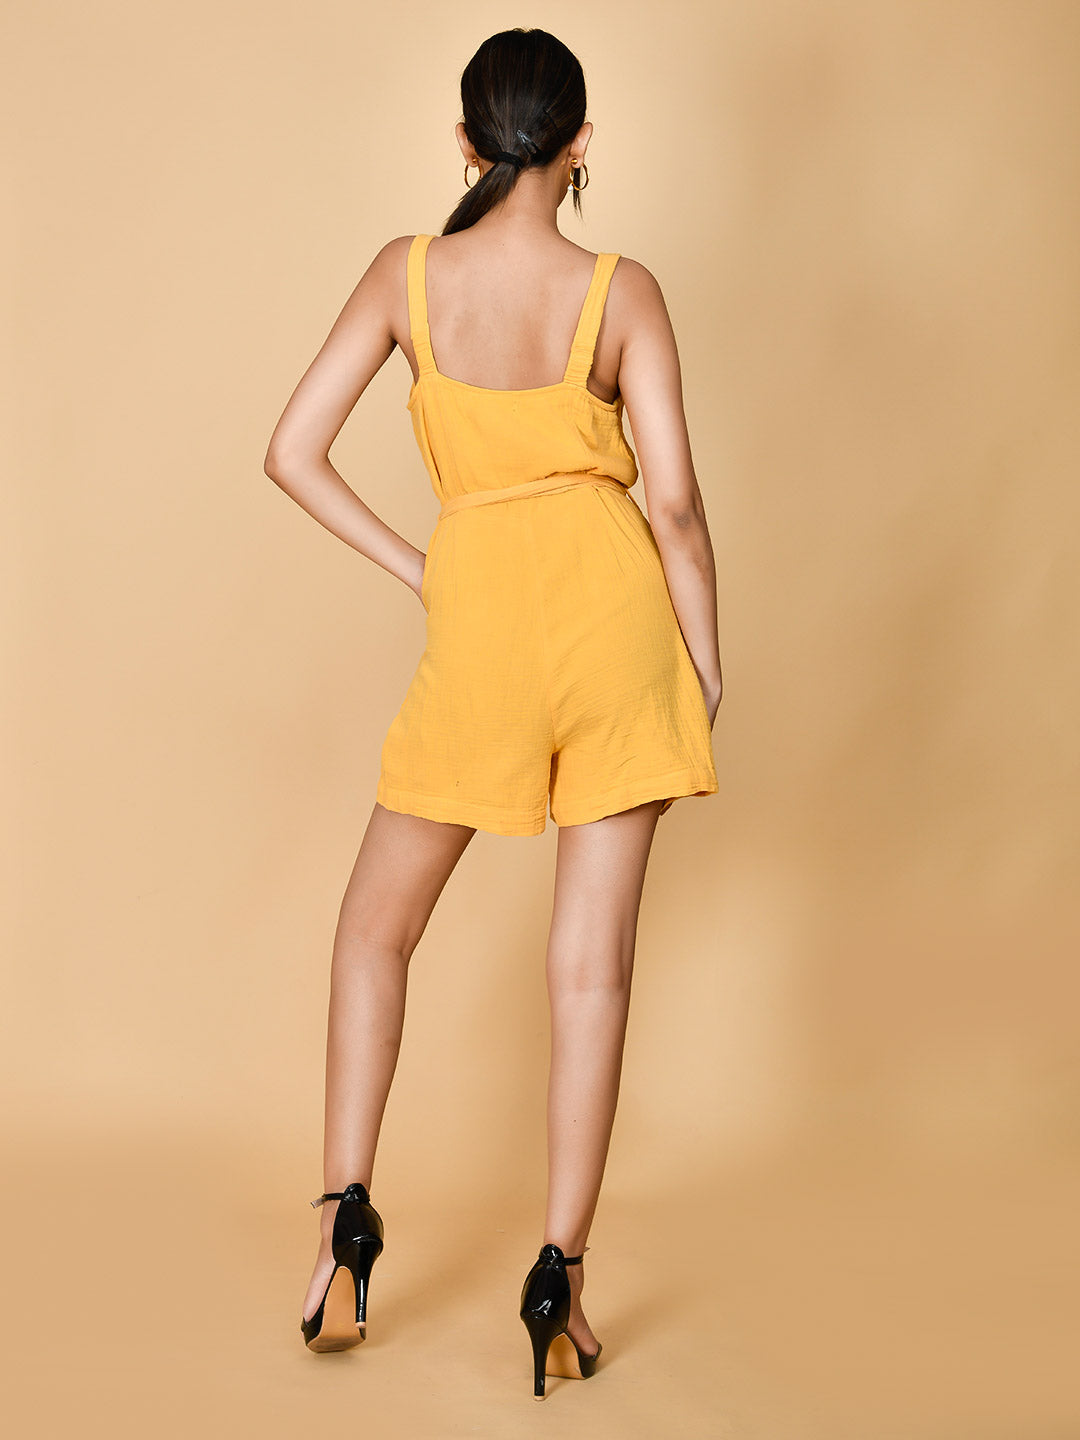 Looking for the perfect dress for your next party? Look no further than our Yellow Short Western Party Dress for girls and women! This gorgeous dress features a vibrant yellow color and a flattering short length that will make you stand out in any crowd. Plus, its western-inspired design adds a touch of playful charm to your outfit. Don't miss out on this must-have dress.